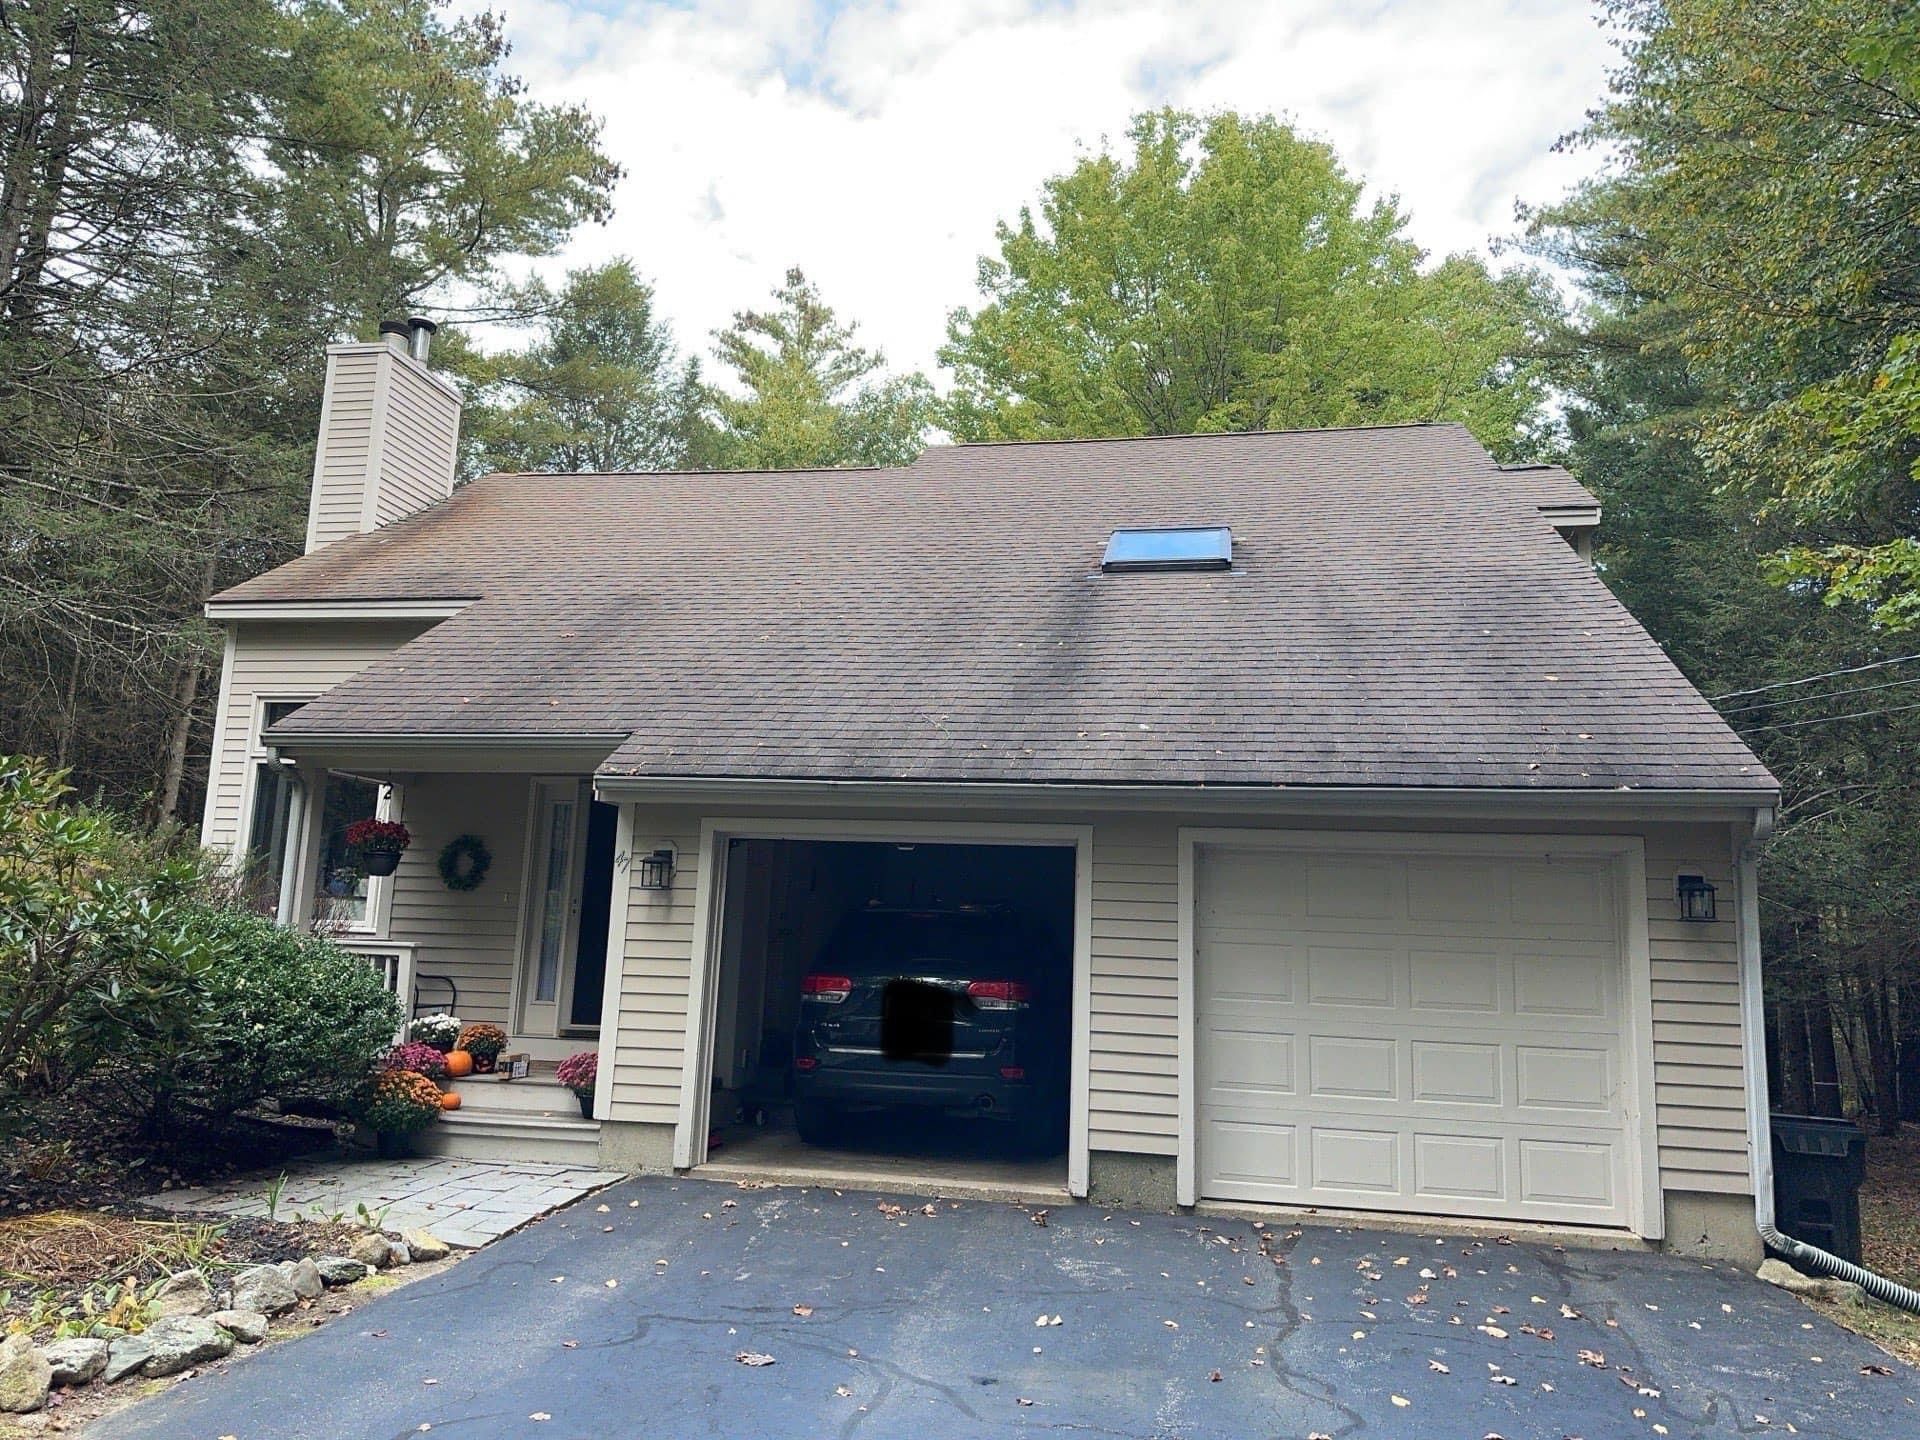 Before and after in Barrington NH! 
Owens Corning Williamsburg Grey!
New Velux Skylights